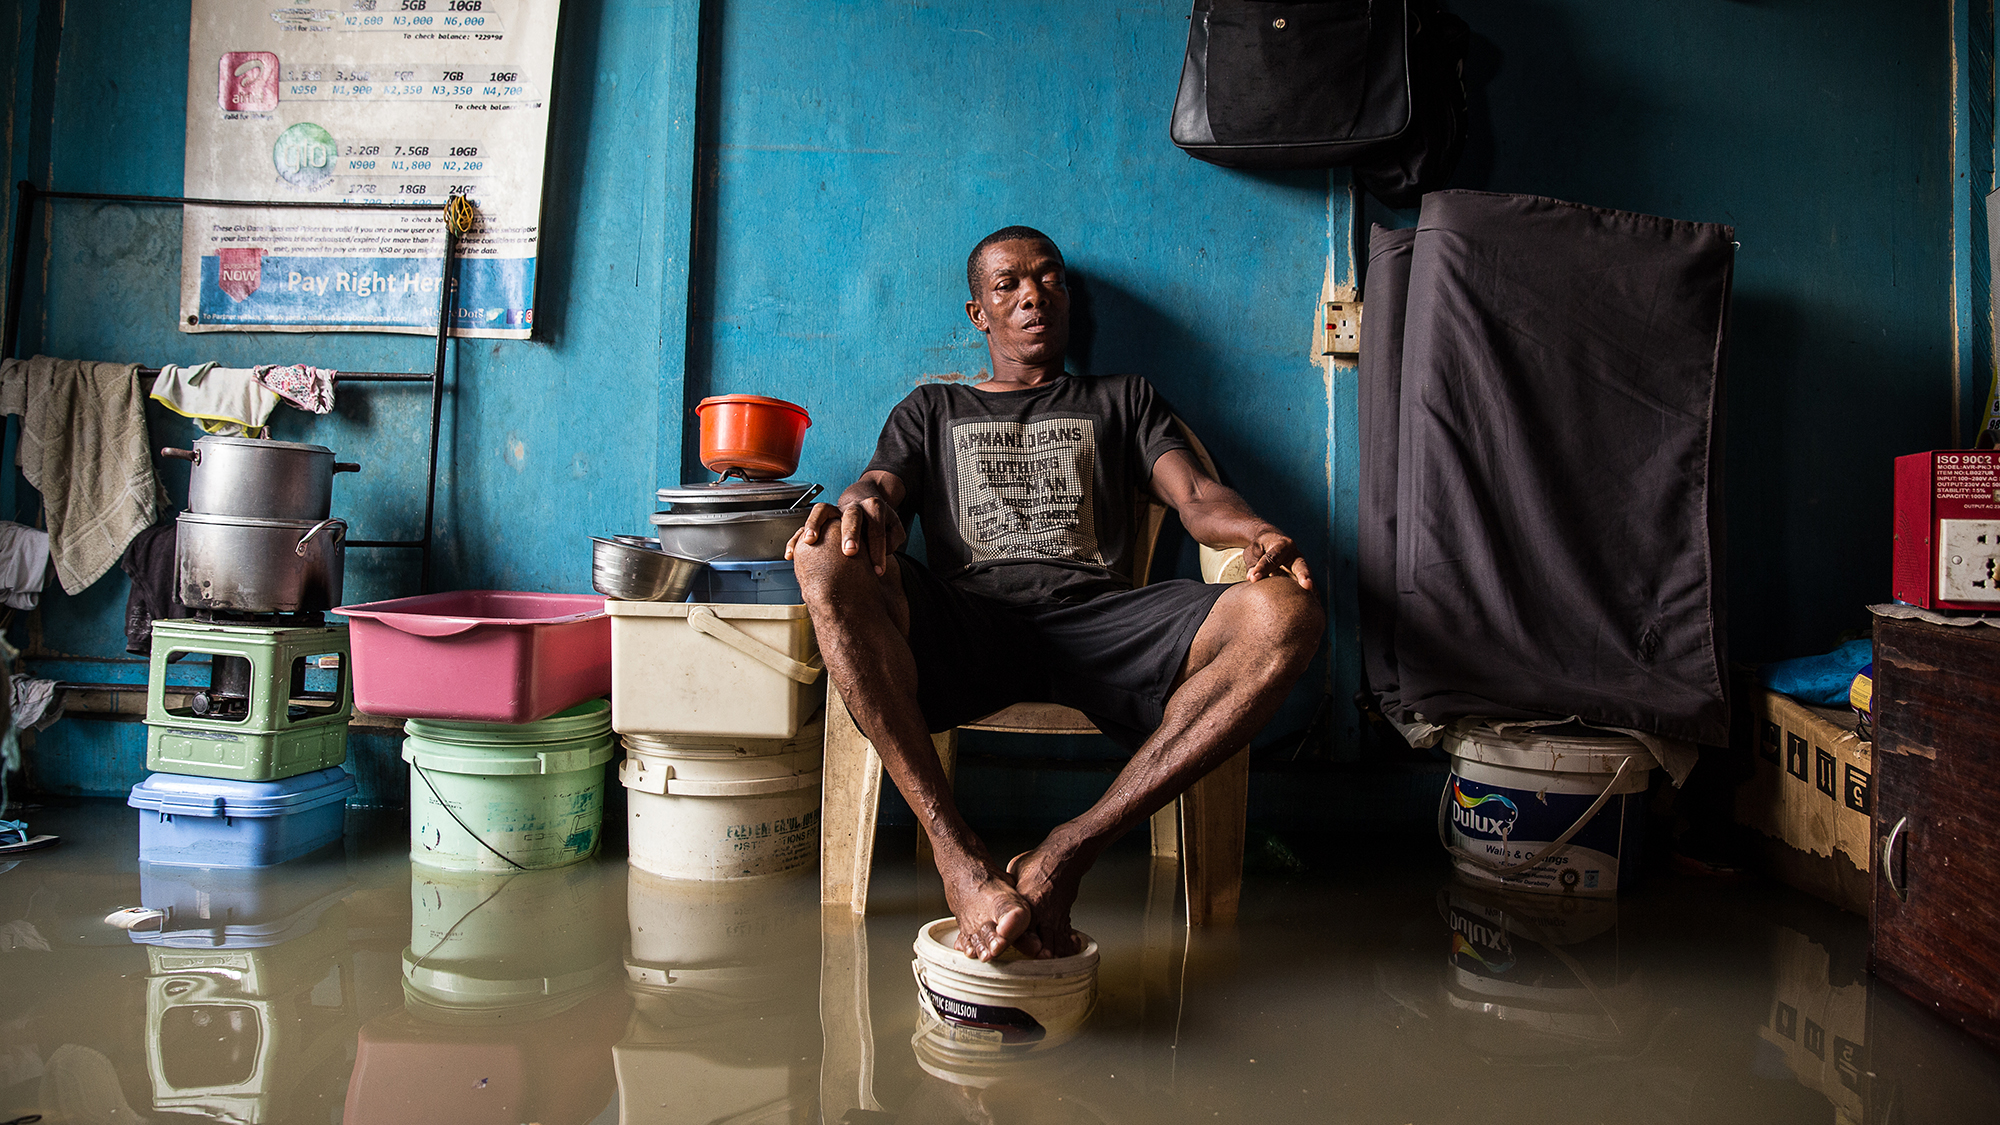 A man sits in centre frame, surrounded by rising flood water and his belongings